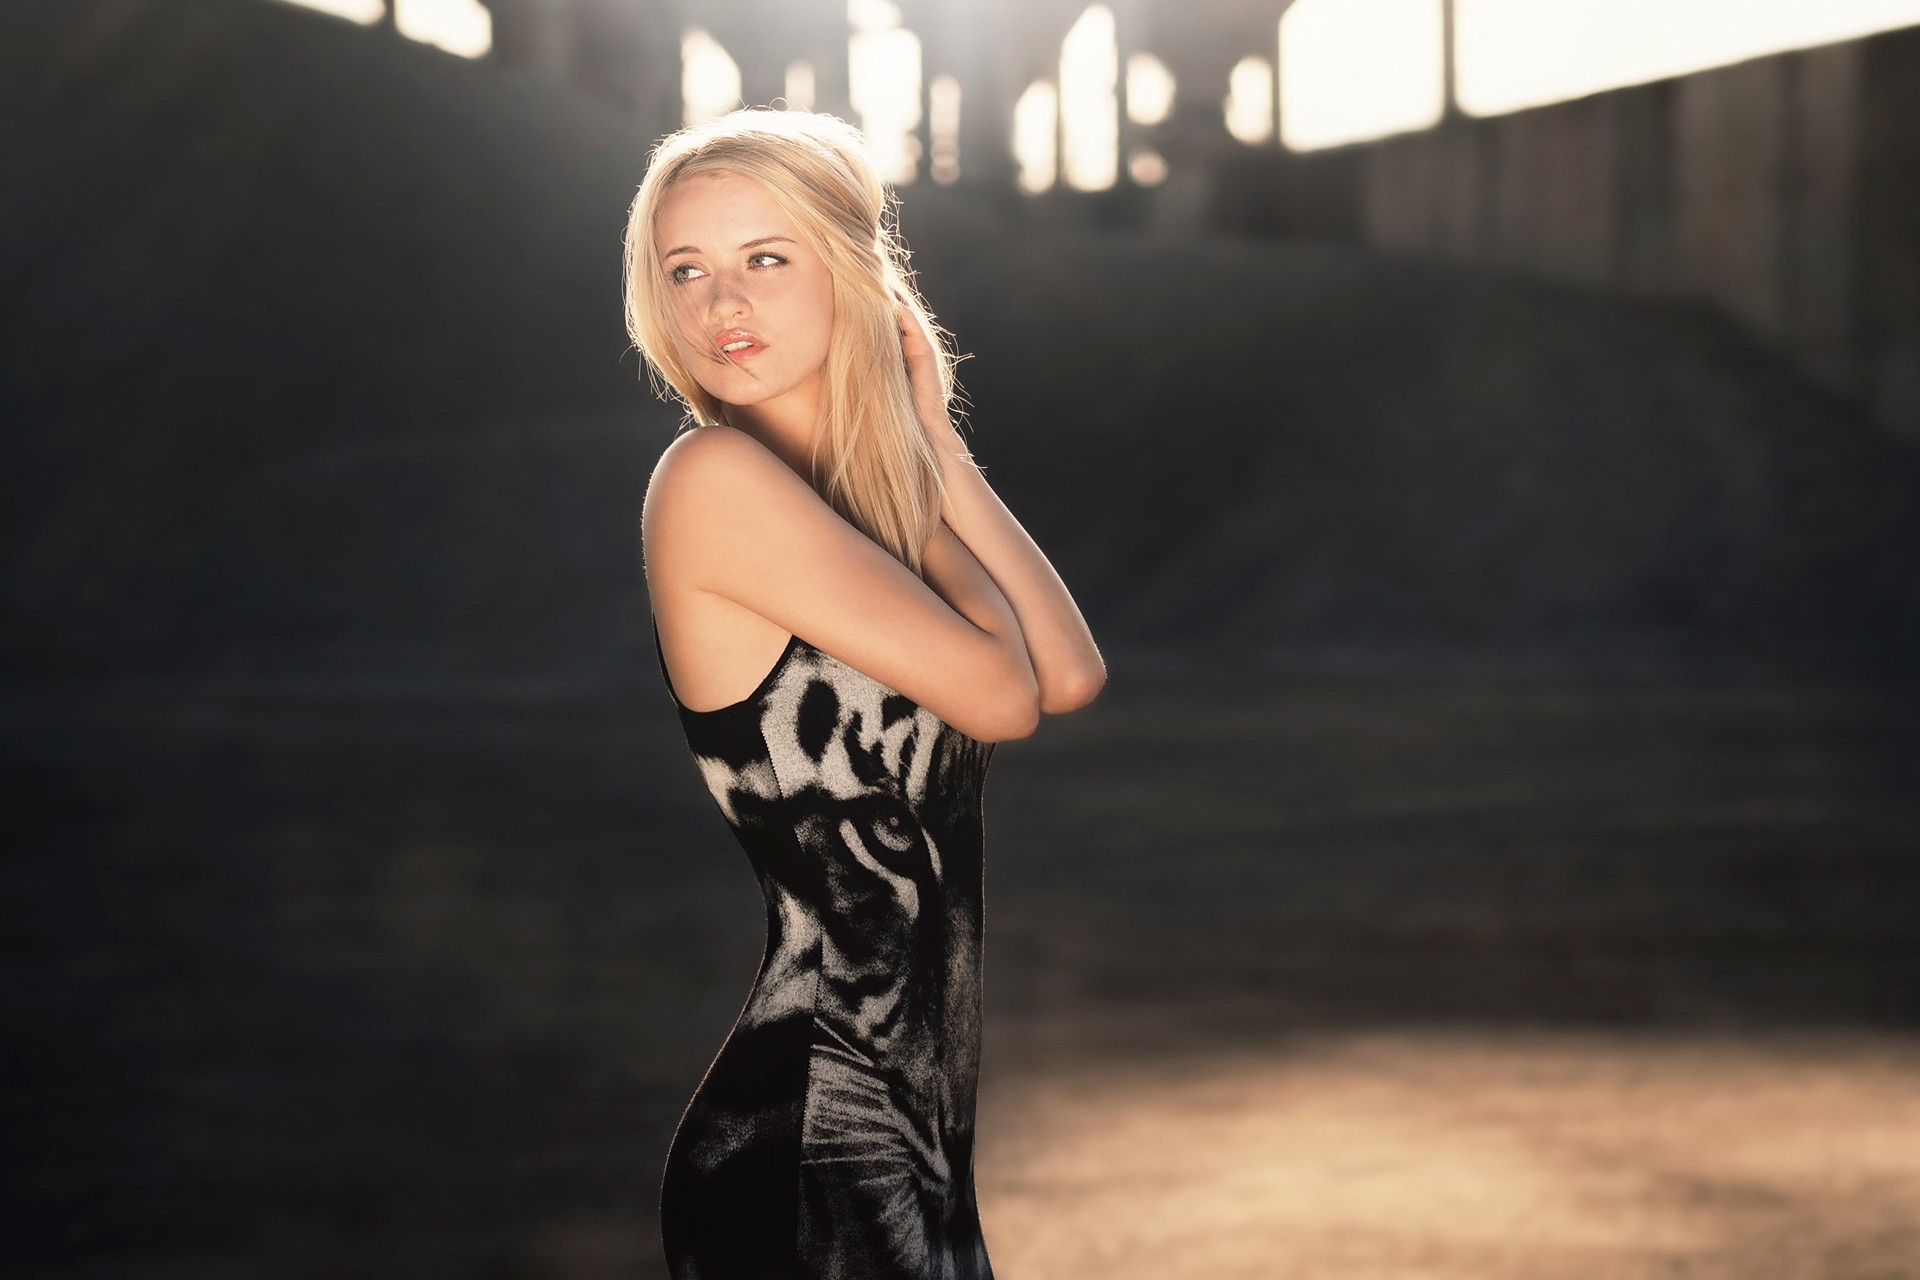 #dress, #blonde, #model, #tight Clothing, #looking - Girl , HD Wallpaper & Backgrounds